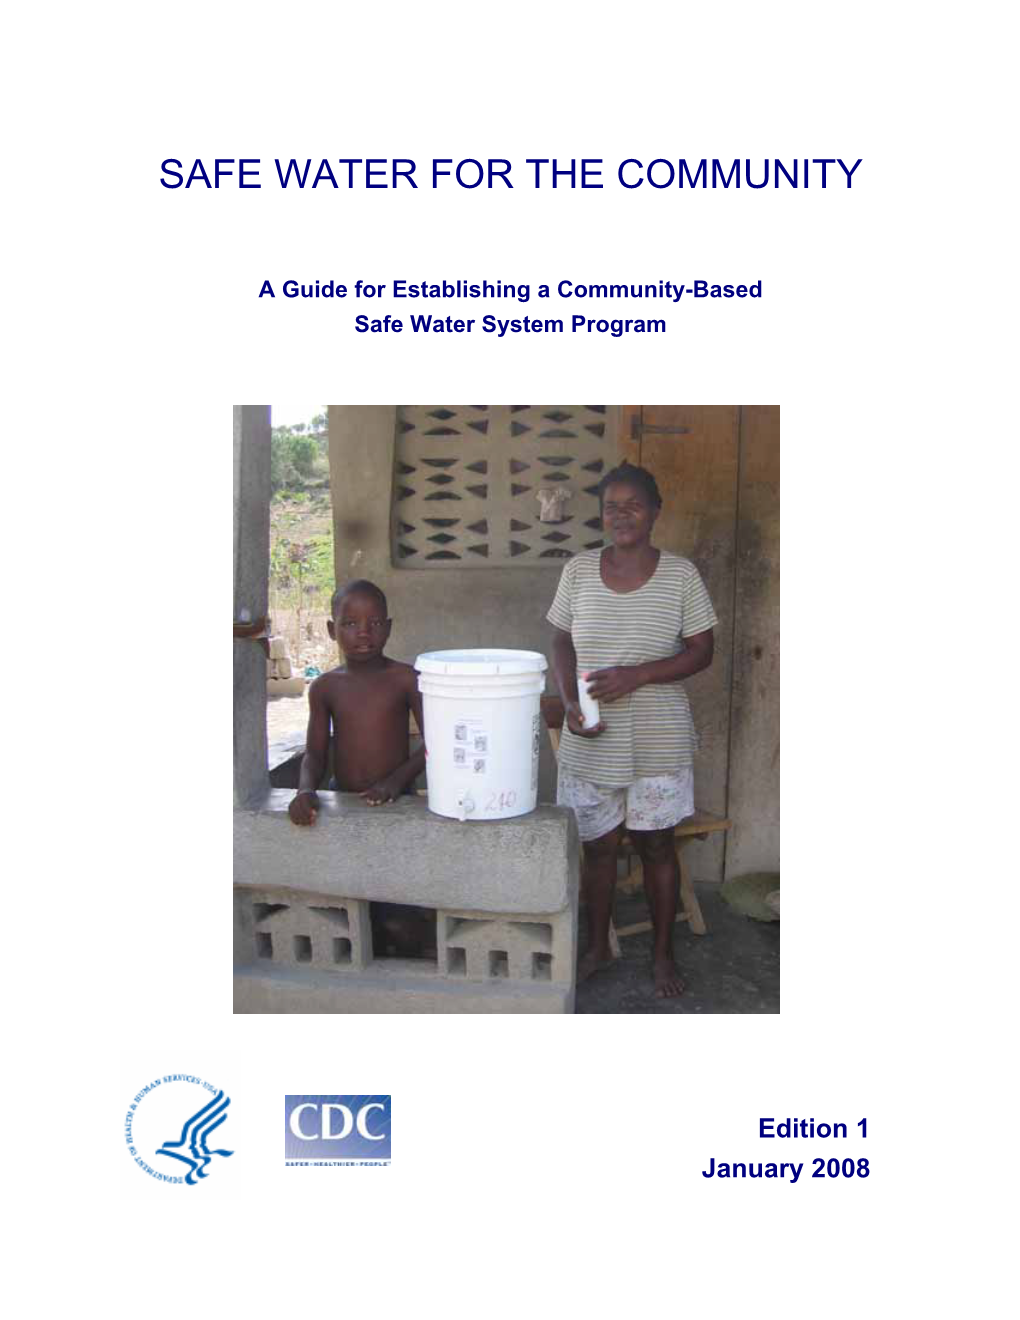 Safe Water for the Community